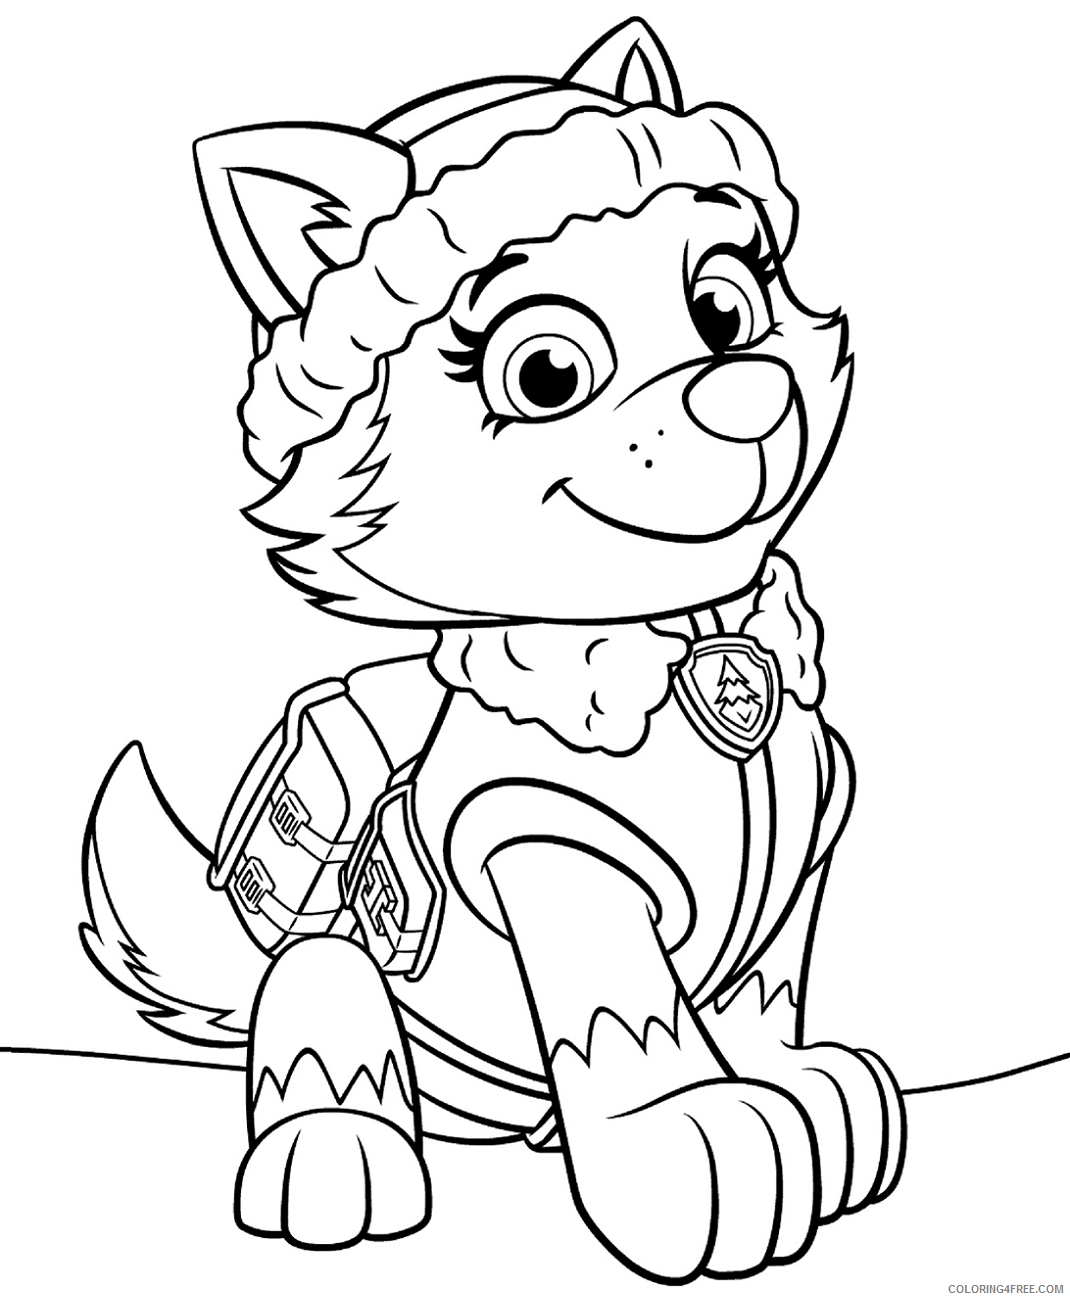 Paw Patrol Coloring Pages TV Film Printable 2020 05883 Coloring4free